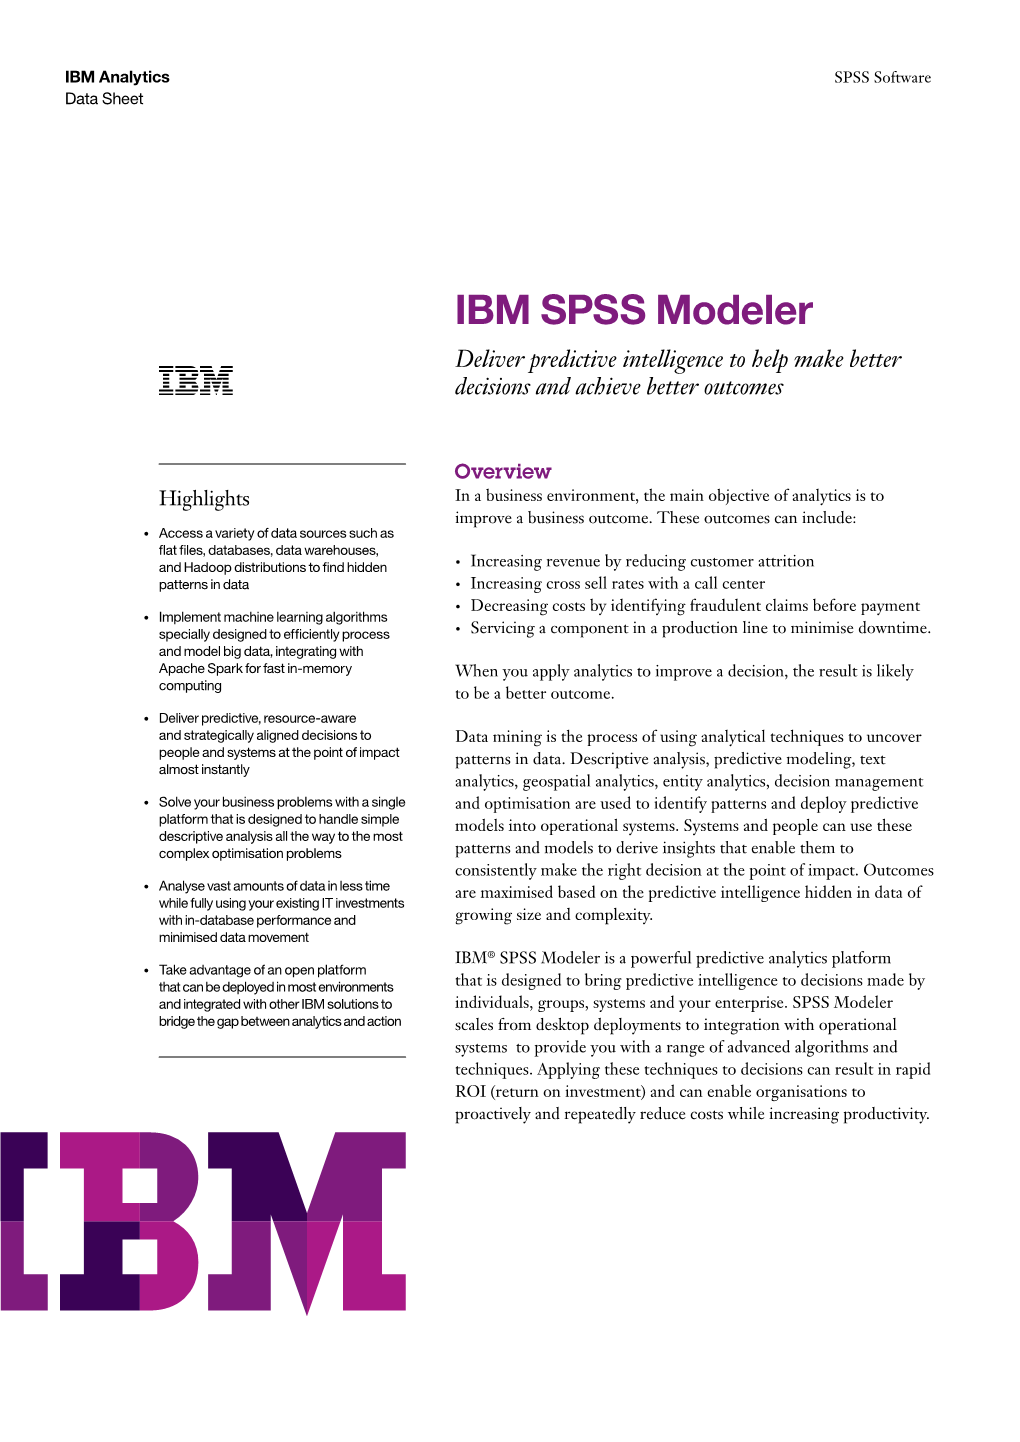 IBM SPSS Modeler Deliver Predictive Intelligence to Help Make Better Decisions and Achieve Better Outcomes